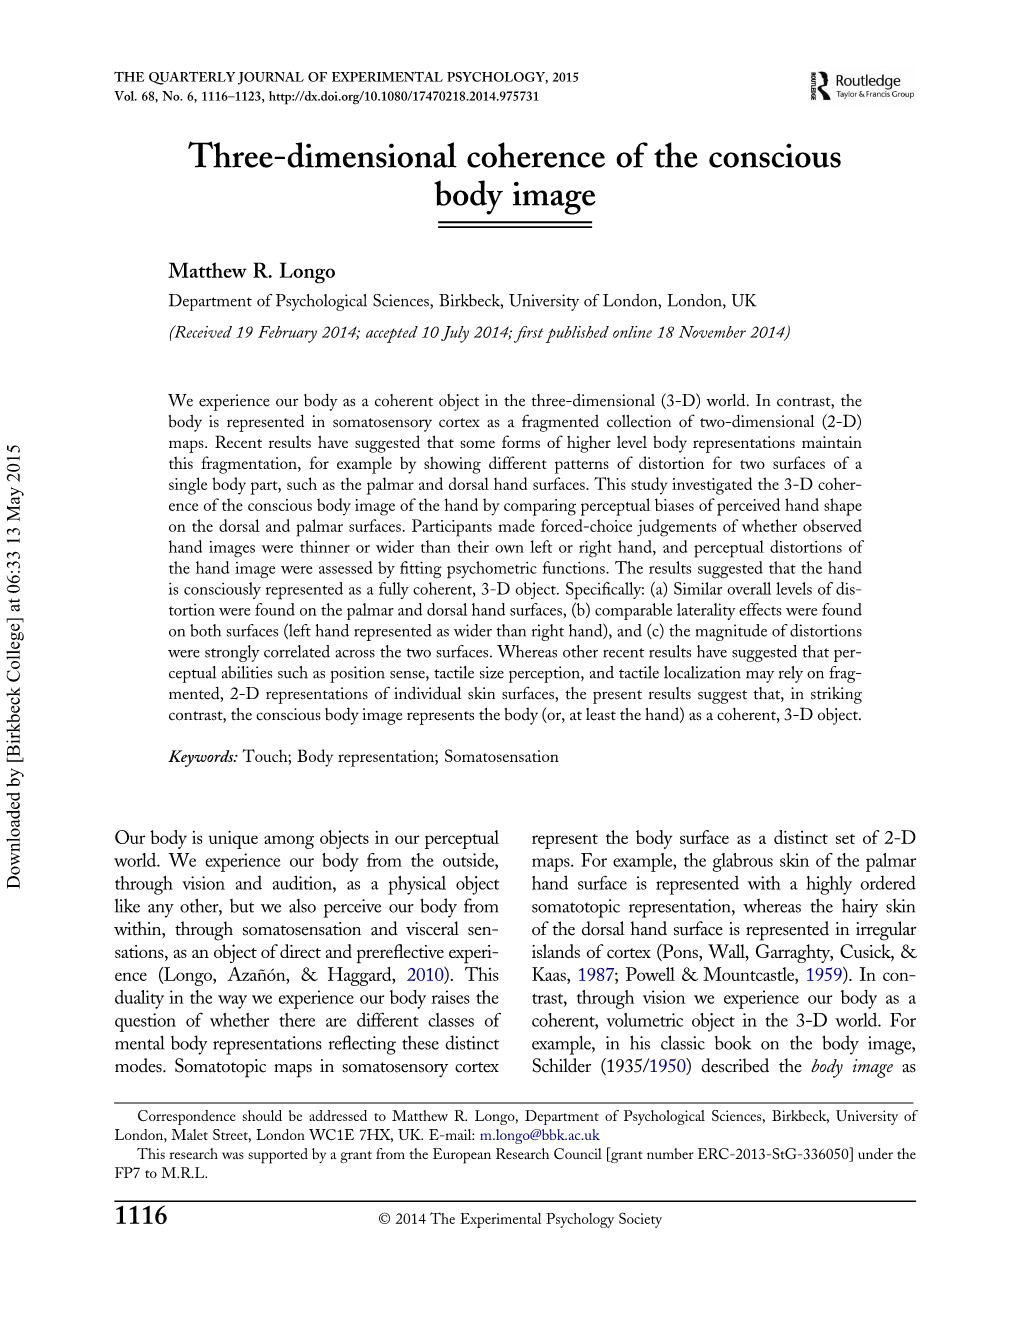 Three-Dimensional Coherence of the Conscious Body'image